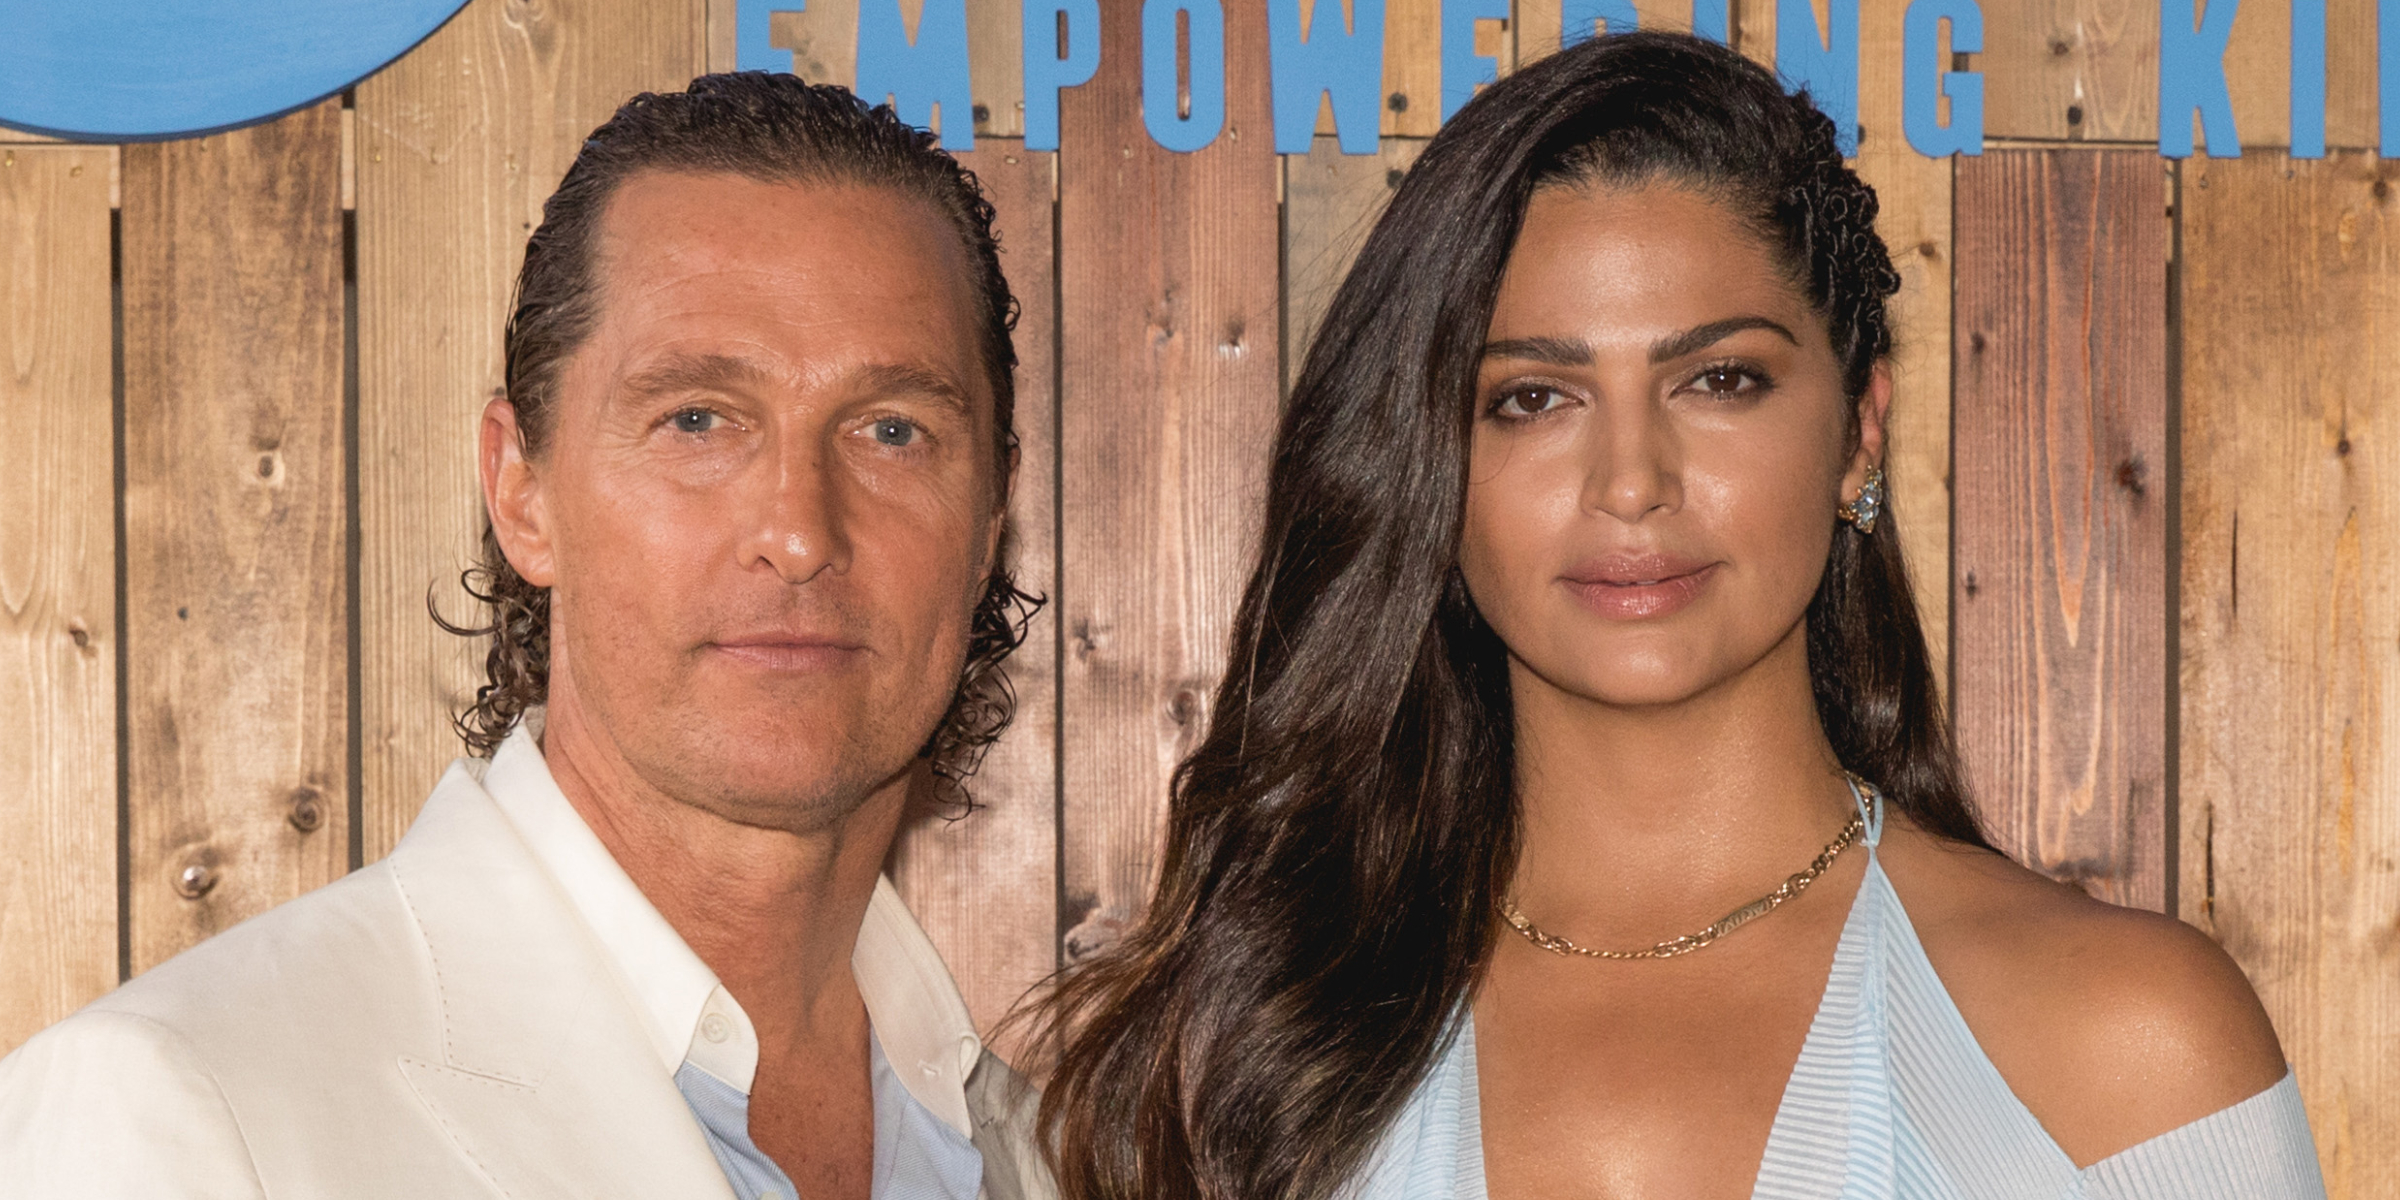 Matthew McConaughey and Camila Alves | Source: Getty Images